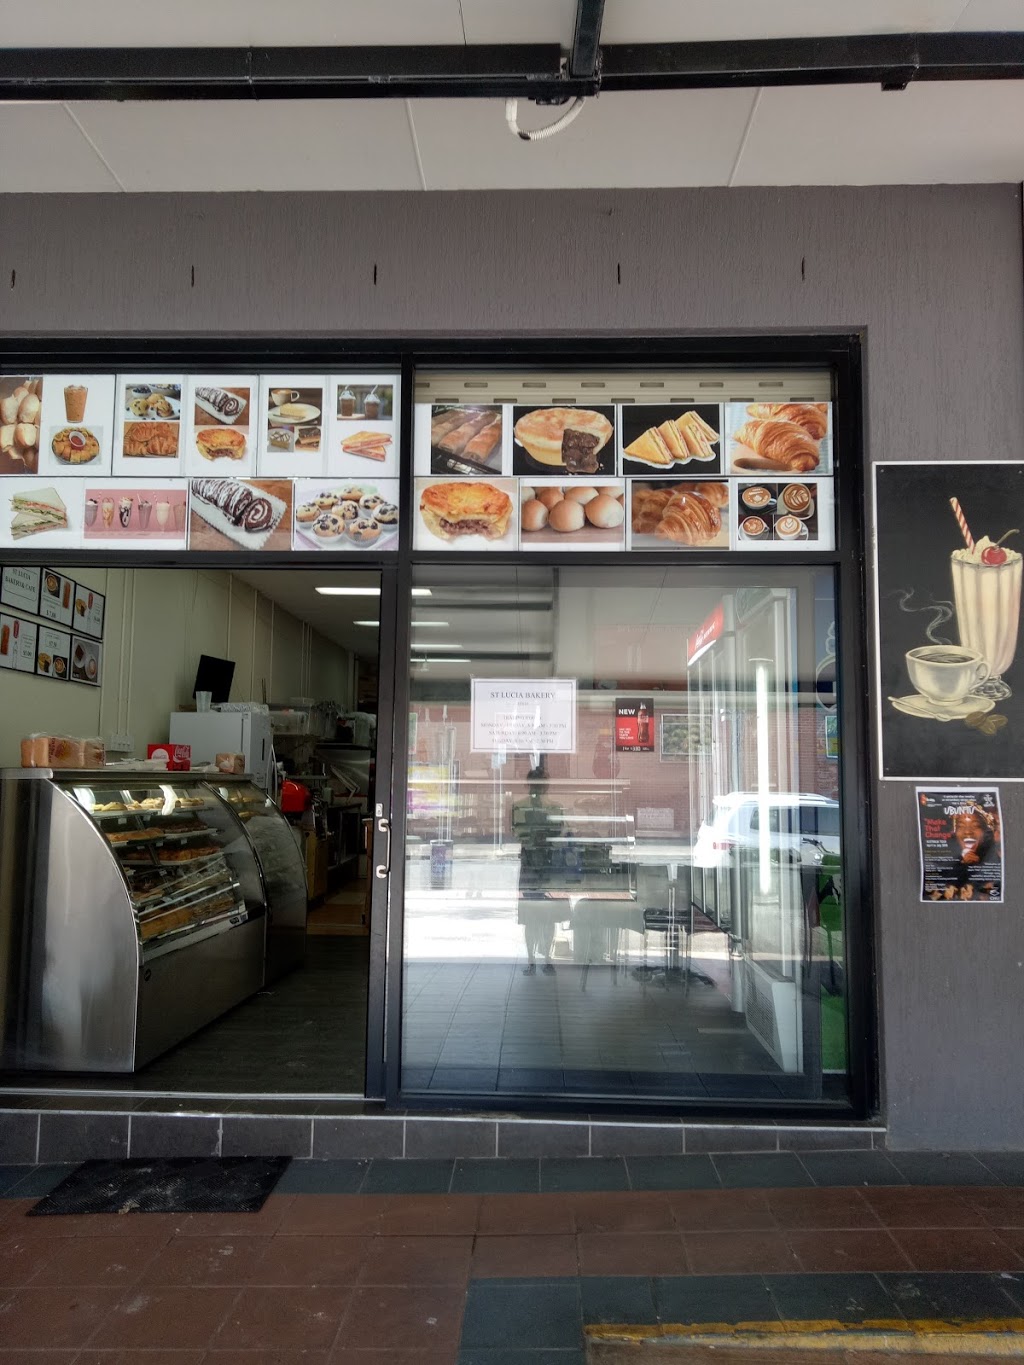 Saint Lucia Bakery & Cafe | bakery | 191 Sir Fred Schonell Dr, St Lucia QLD 4067, Australia | 0412799699 OR +61 412 799 699